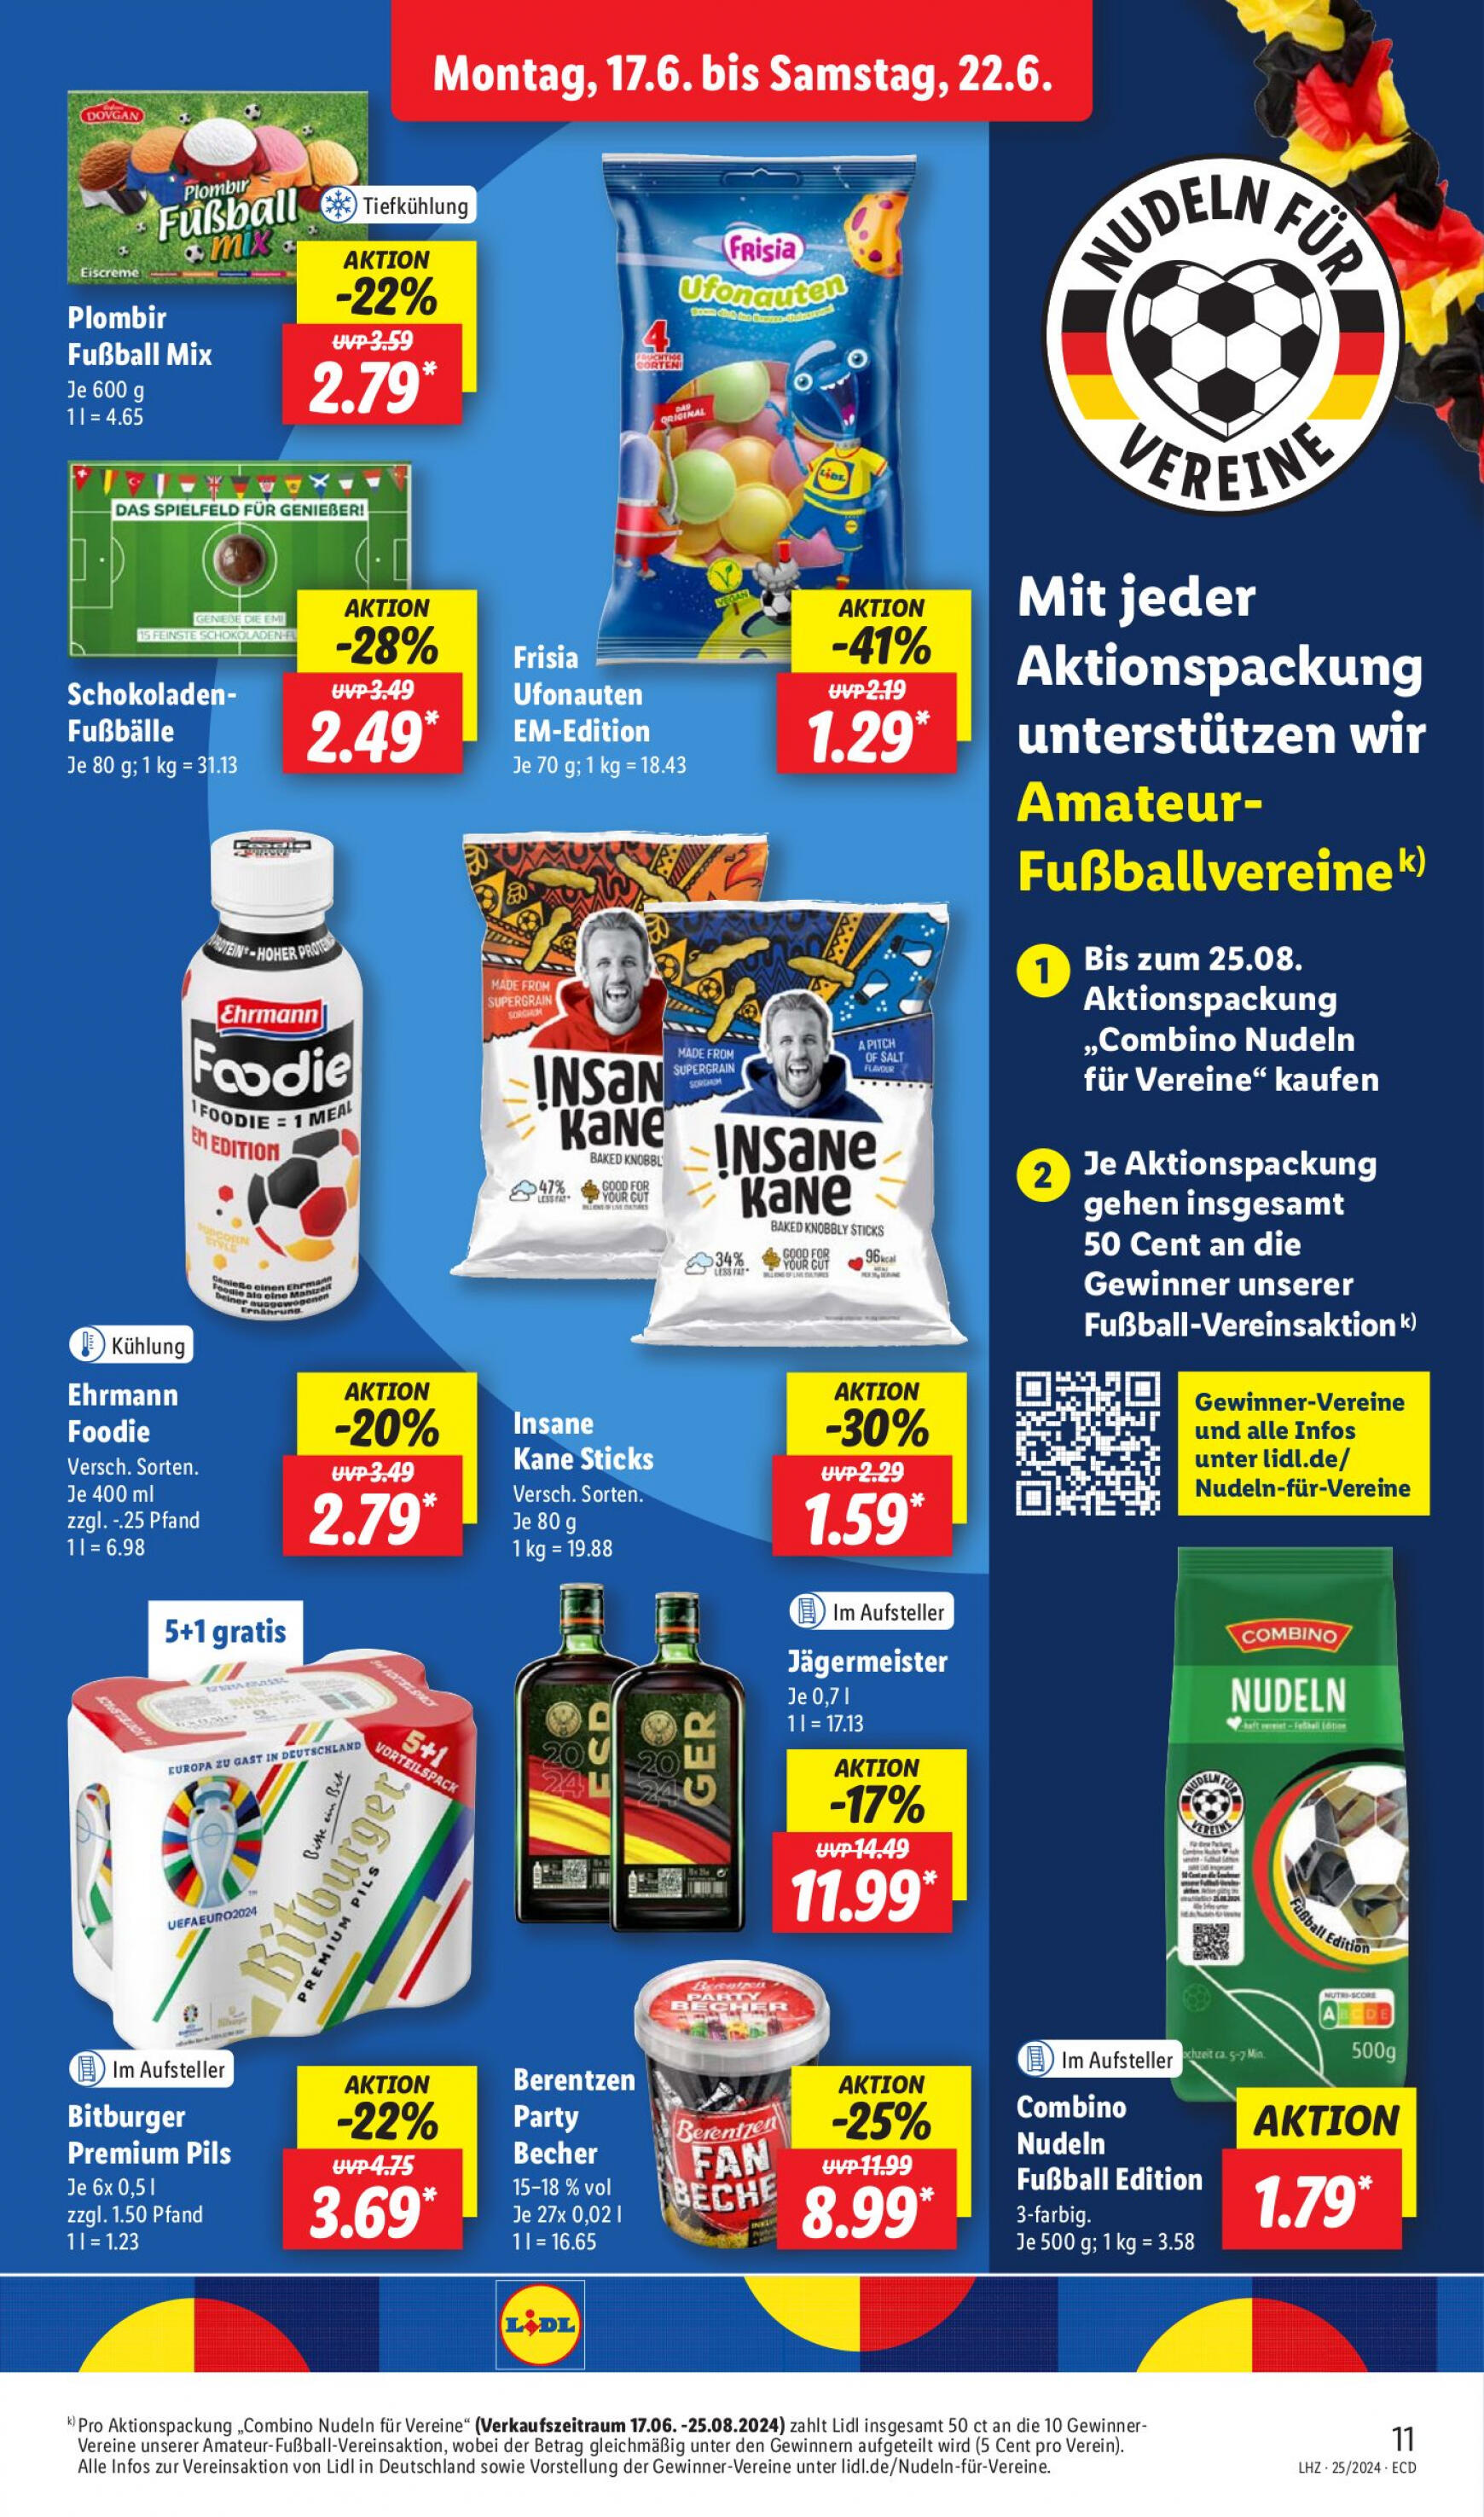 lidl - Flyer Lidl aktuell 17.06. - 22.06. - page: 15